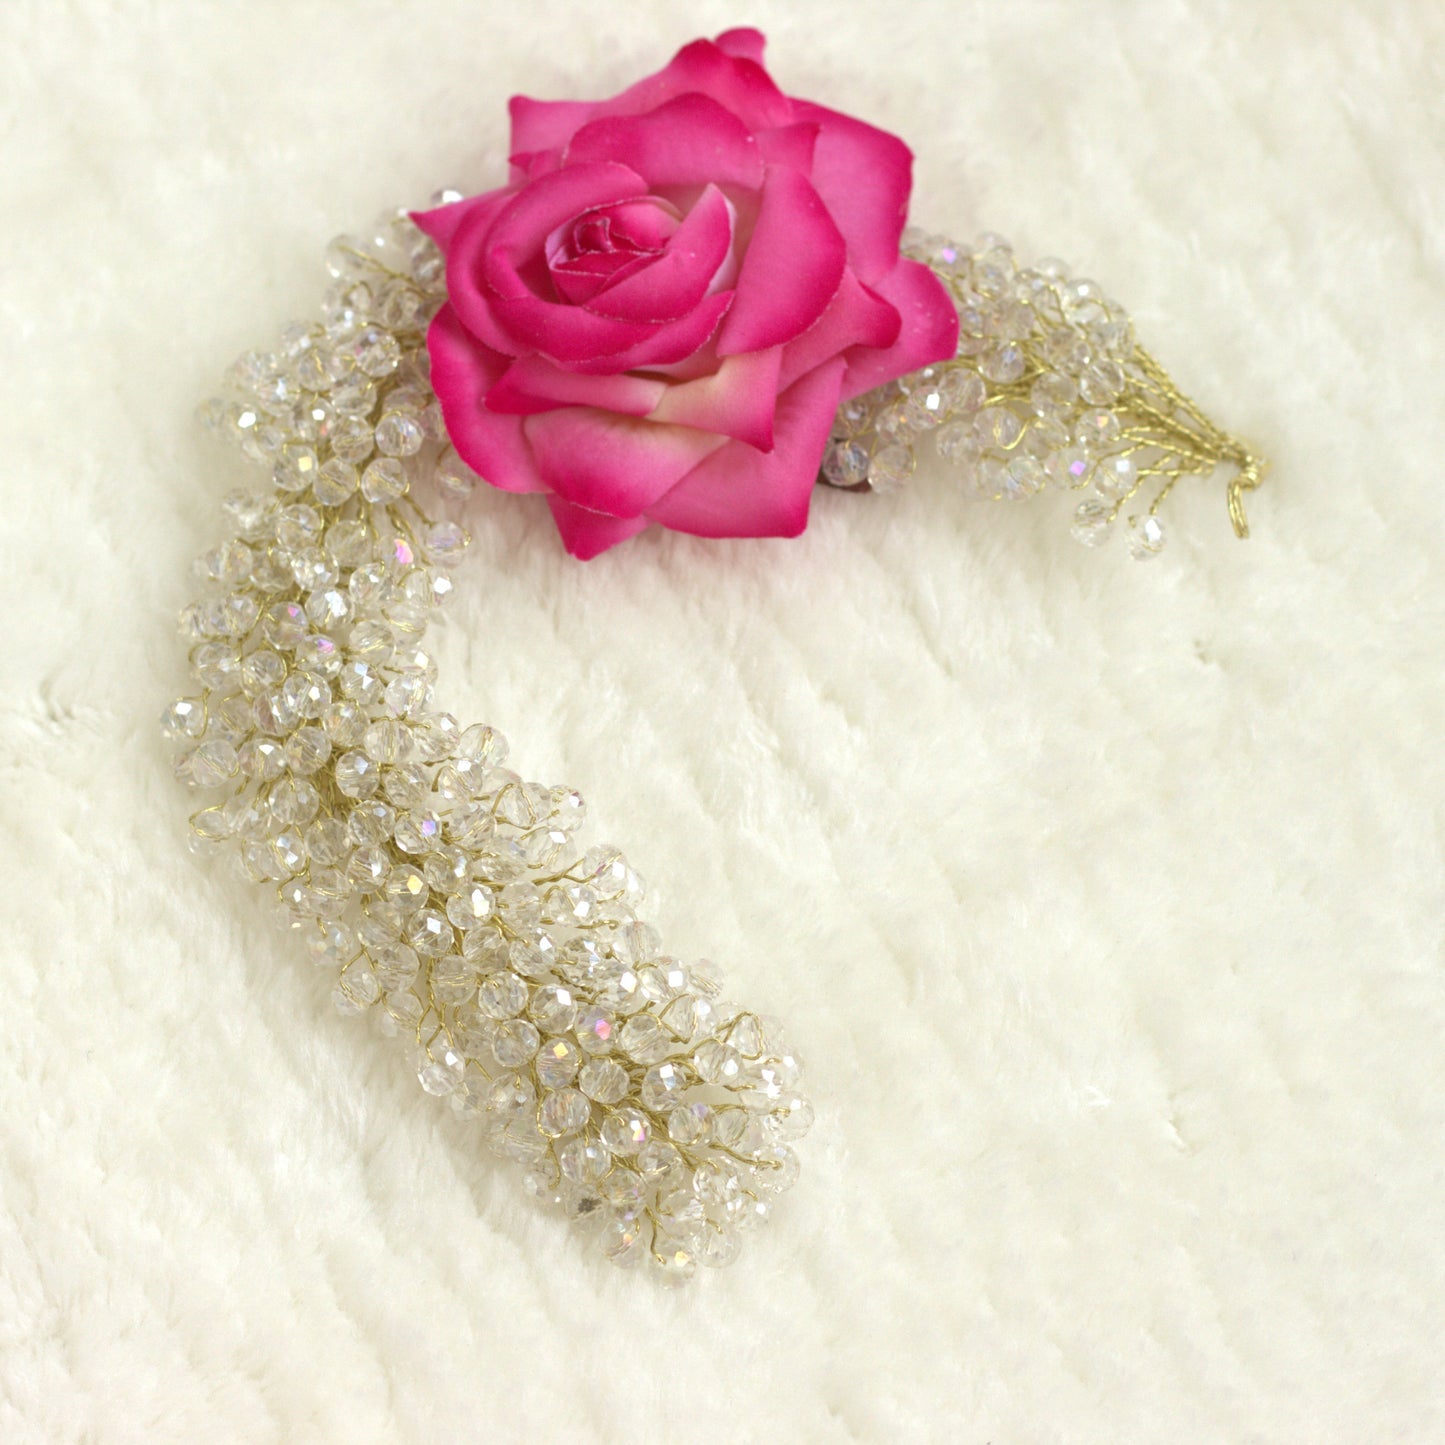 Flexible Crystal with Real Look Rose Artificial Hair Bun Flower Accessory